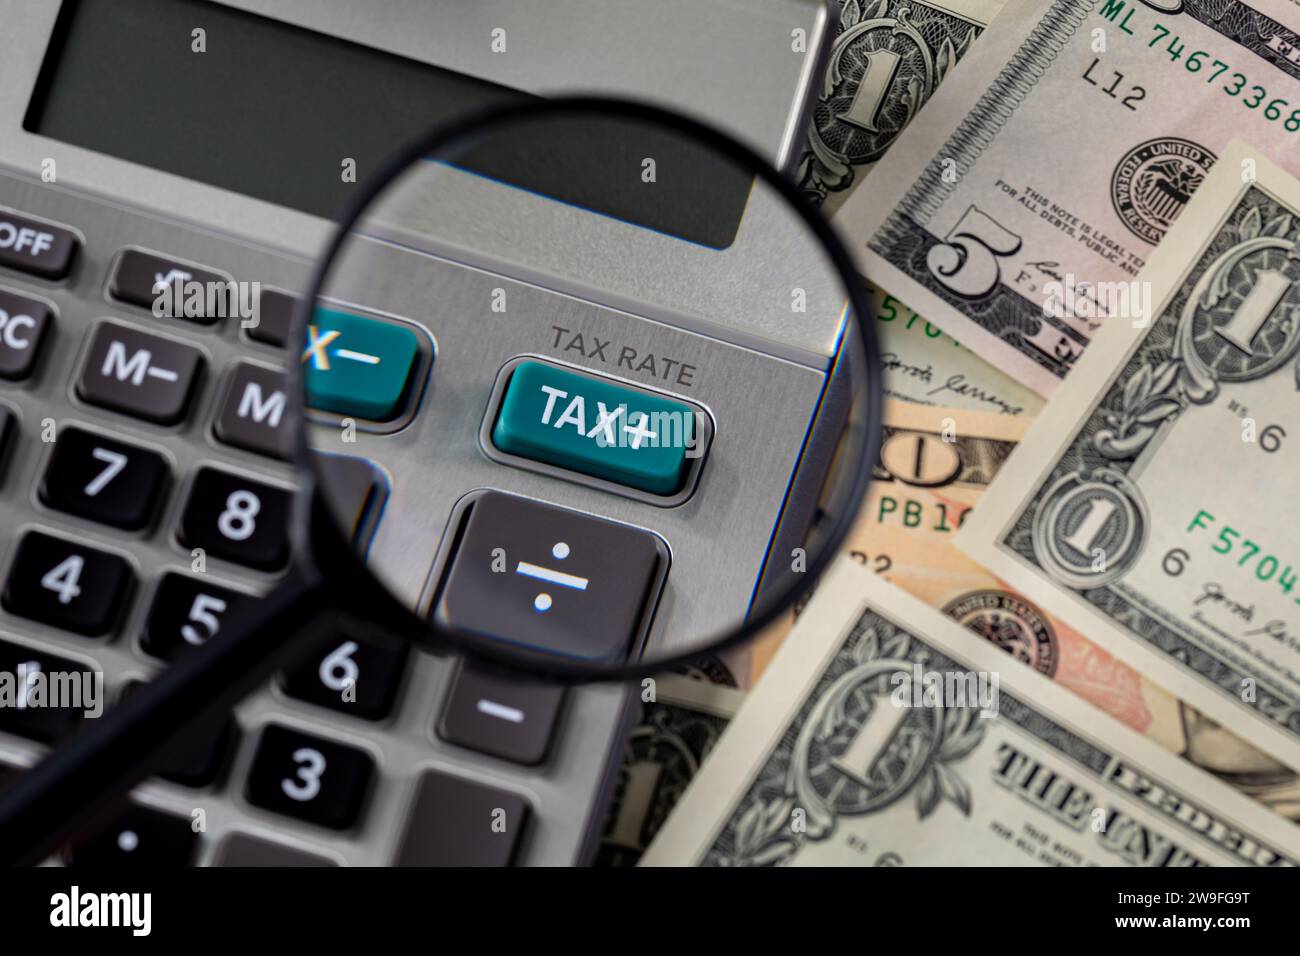 Tax calculator, magnifying glass and cash money. Income, sales and property taxes concept. Stock Photo